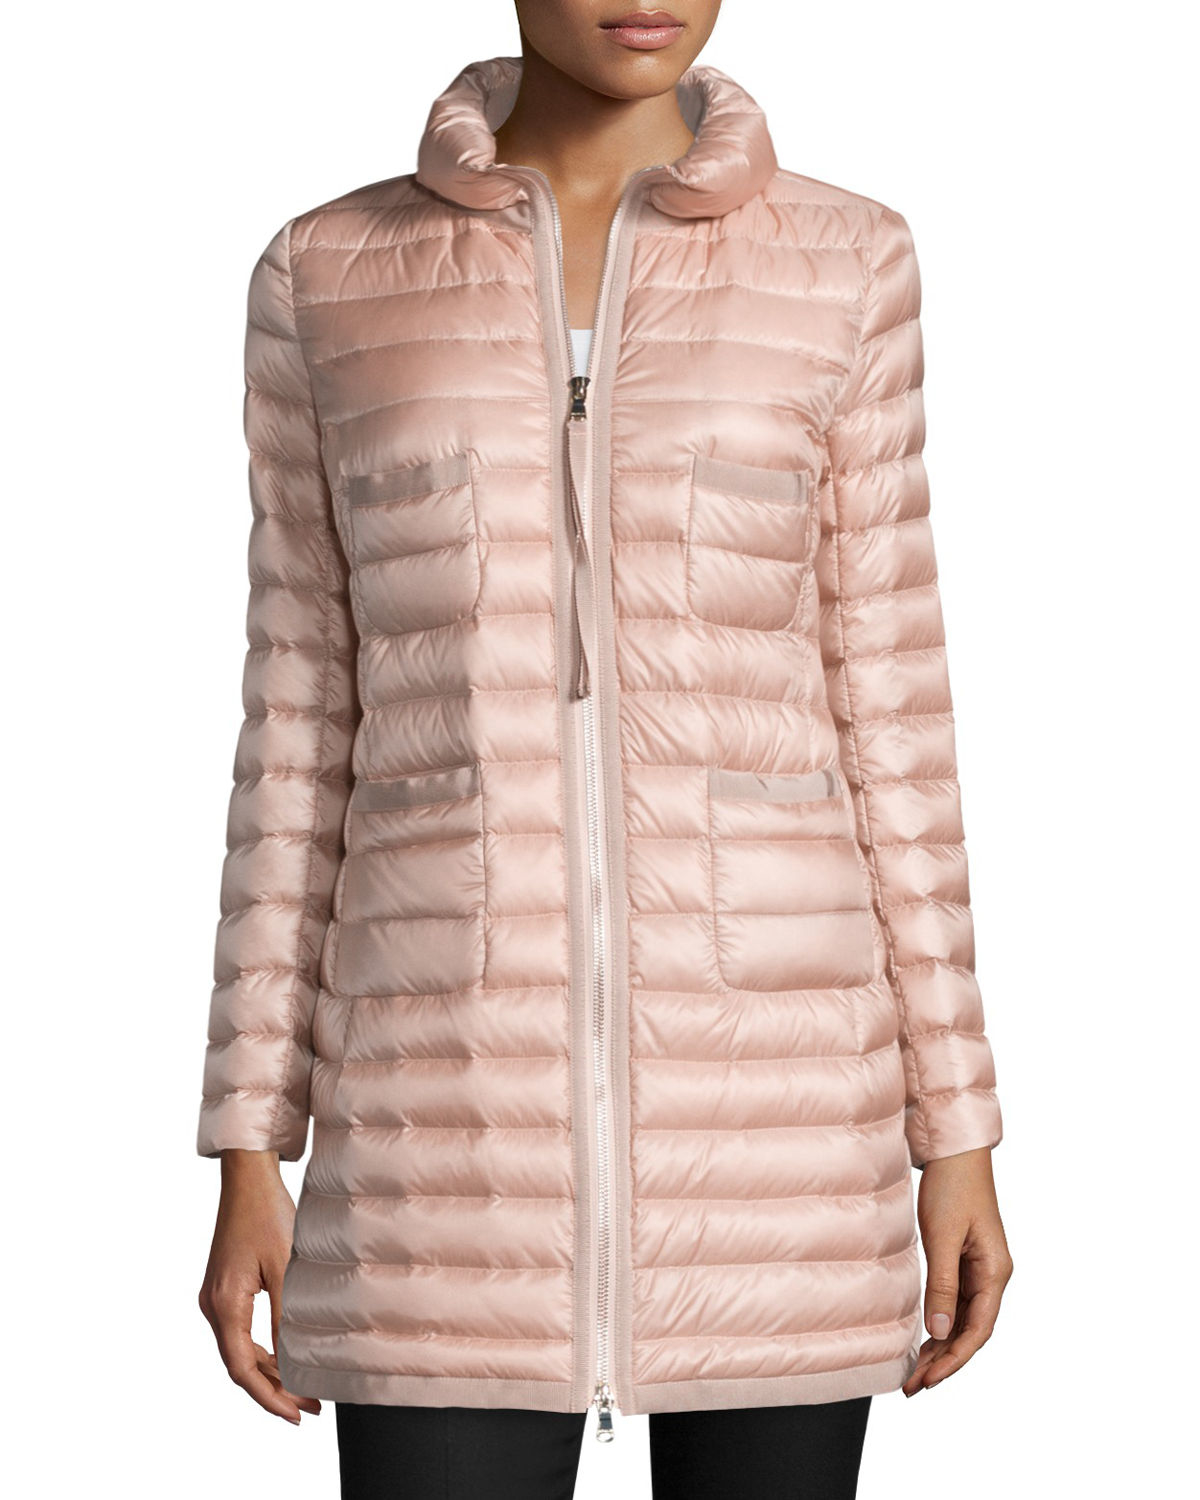 Moncler Bogue Quilted Jacket in Light 